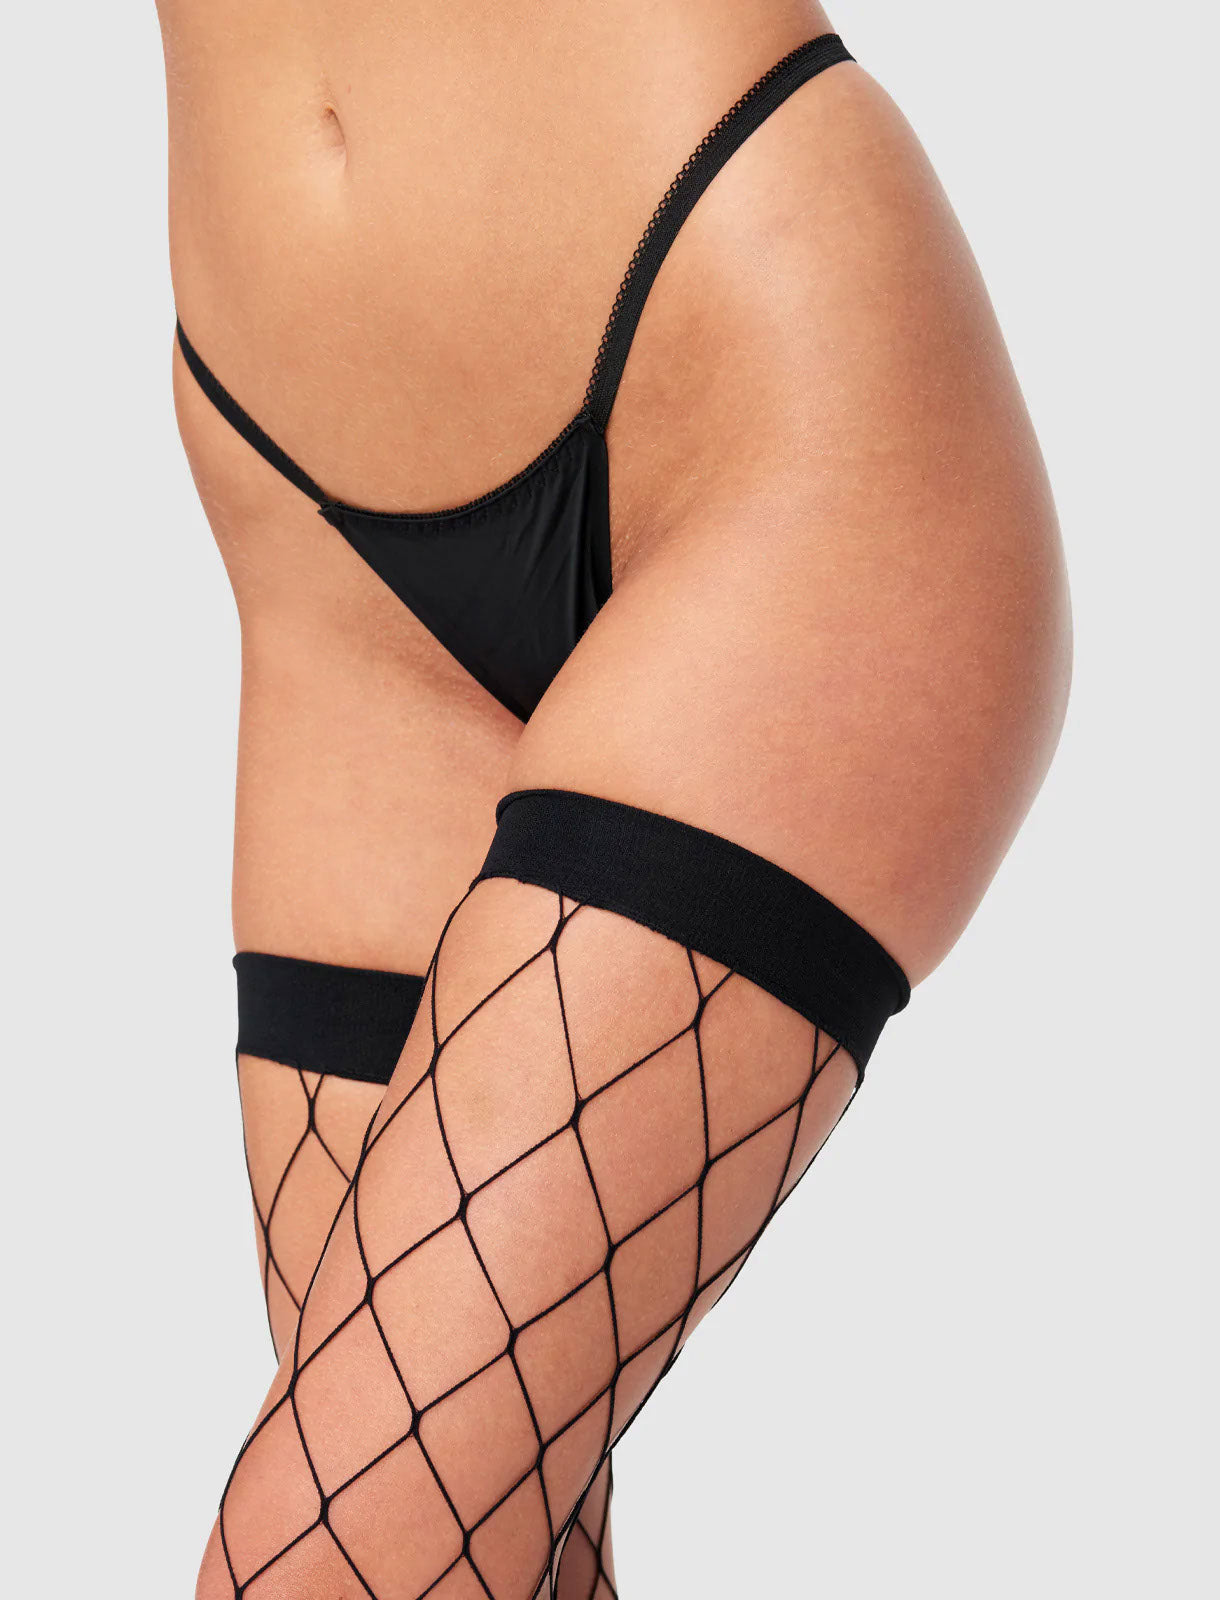 All Netted Up Thigh Highs